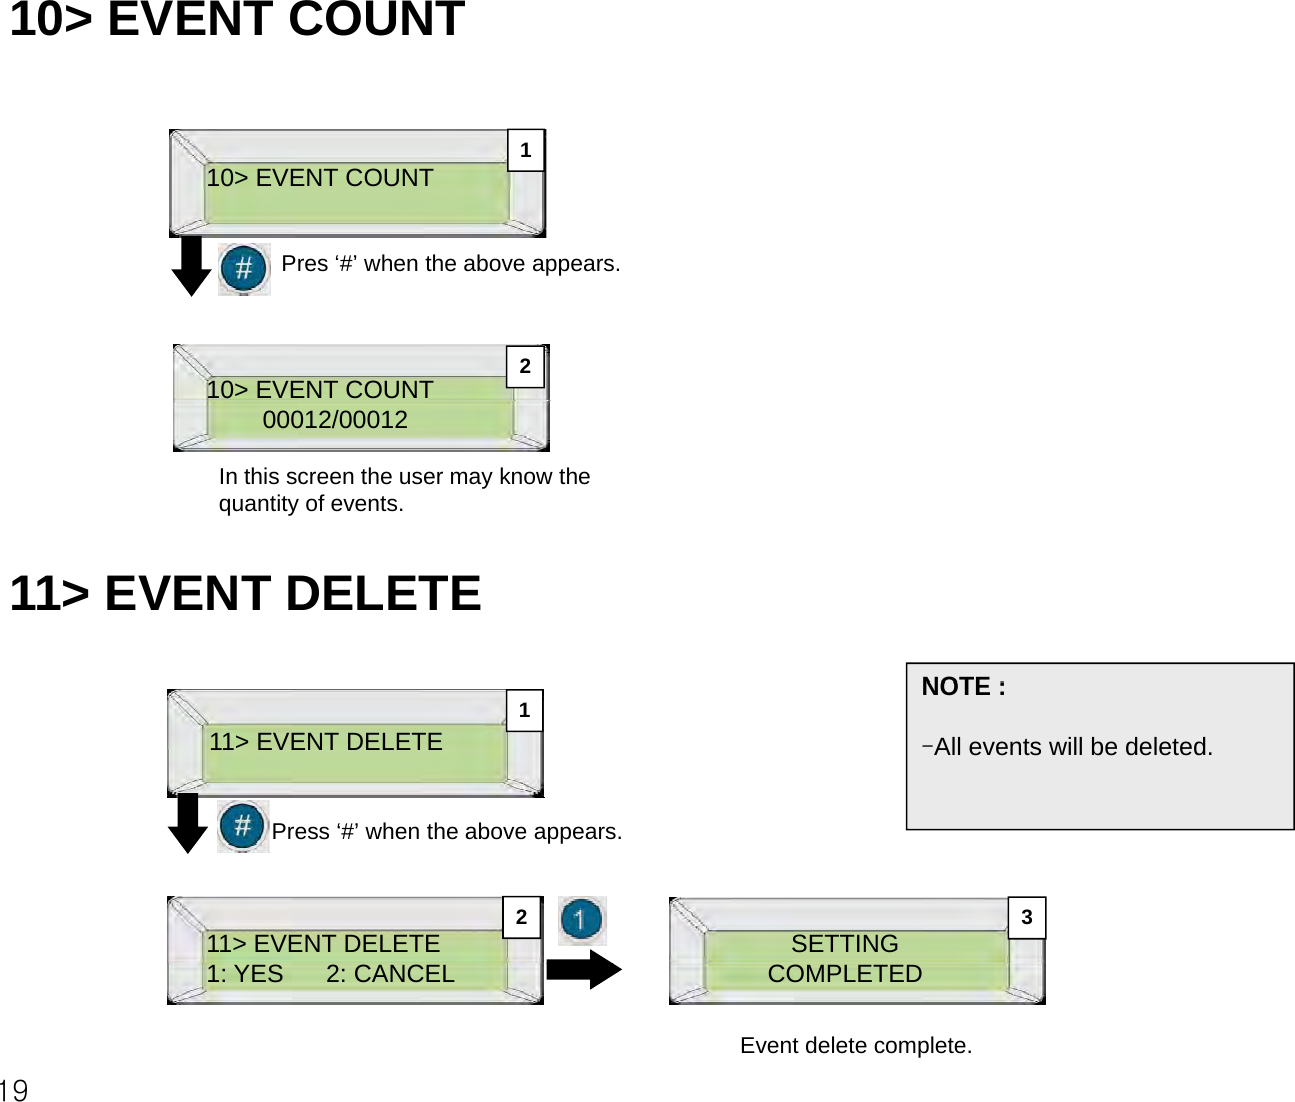 10&gt; EVENT COUNT 10&gt; EVENT COUNTPres‘#’when the above appears1Pres # when the above appears.10&gt; EVENT COUNT 200012/00012In this screen the user may know the quantity of events. 11&gt; EVENT DELETE NOTE :11&gt; EVENT DELETENOTE :-All events will be deleted.1Press ‘#’ when the above appears.11&gt; EVENT DELETE SETTING23191: YES      2: CANCEL COMPLETEDEvent delete complete.